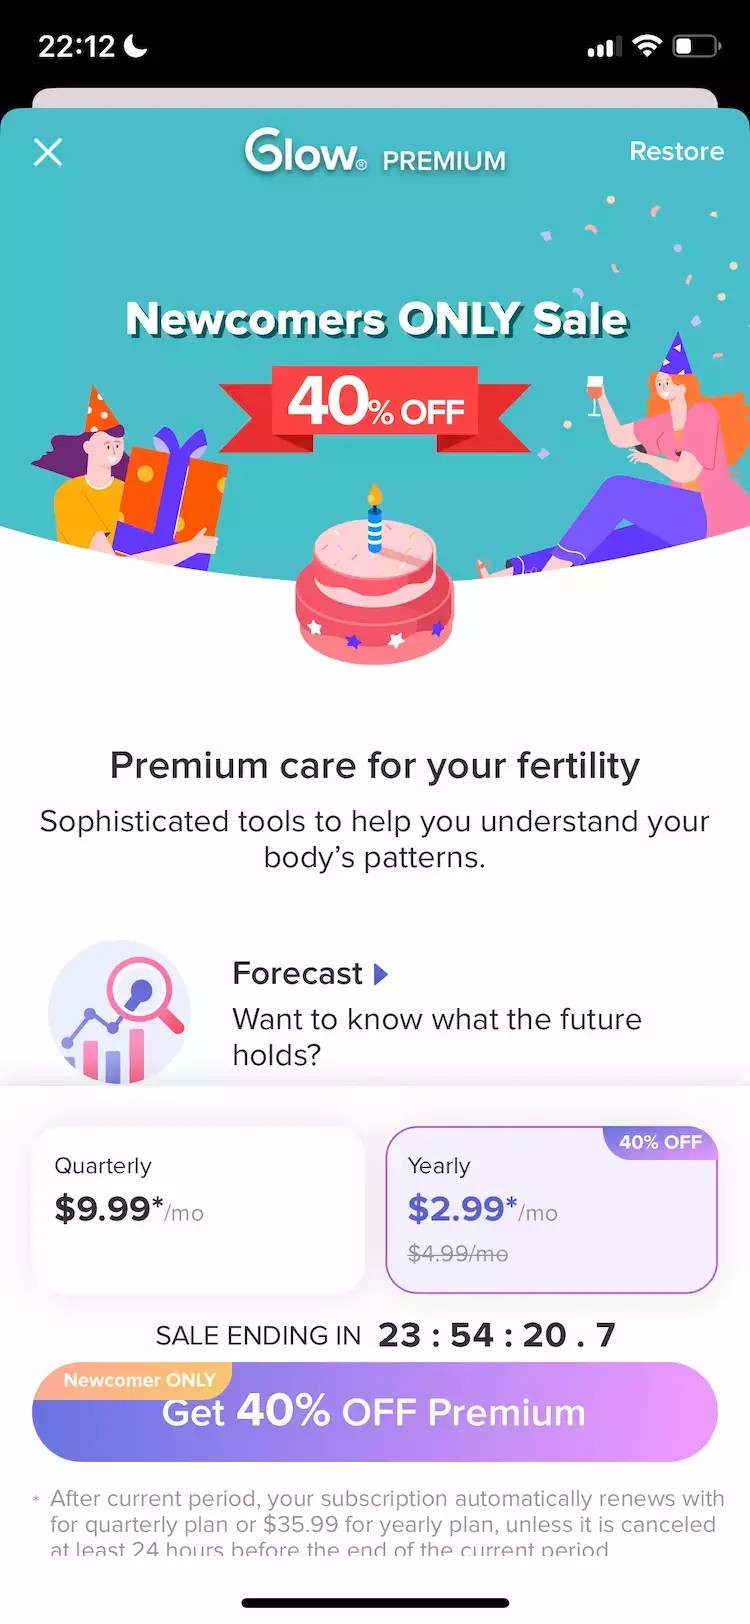 A mobile paywall design example by Glow: AI Ovulation Tracker App from the Health & Fitness category — inner paywall